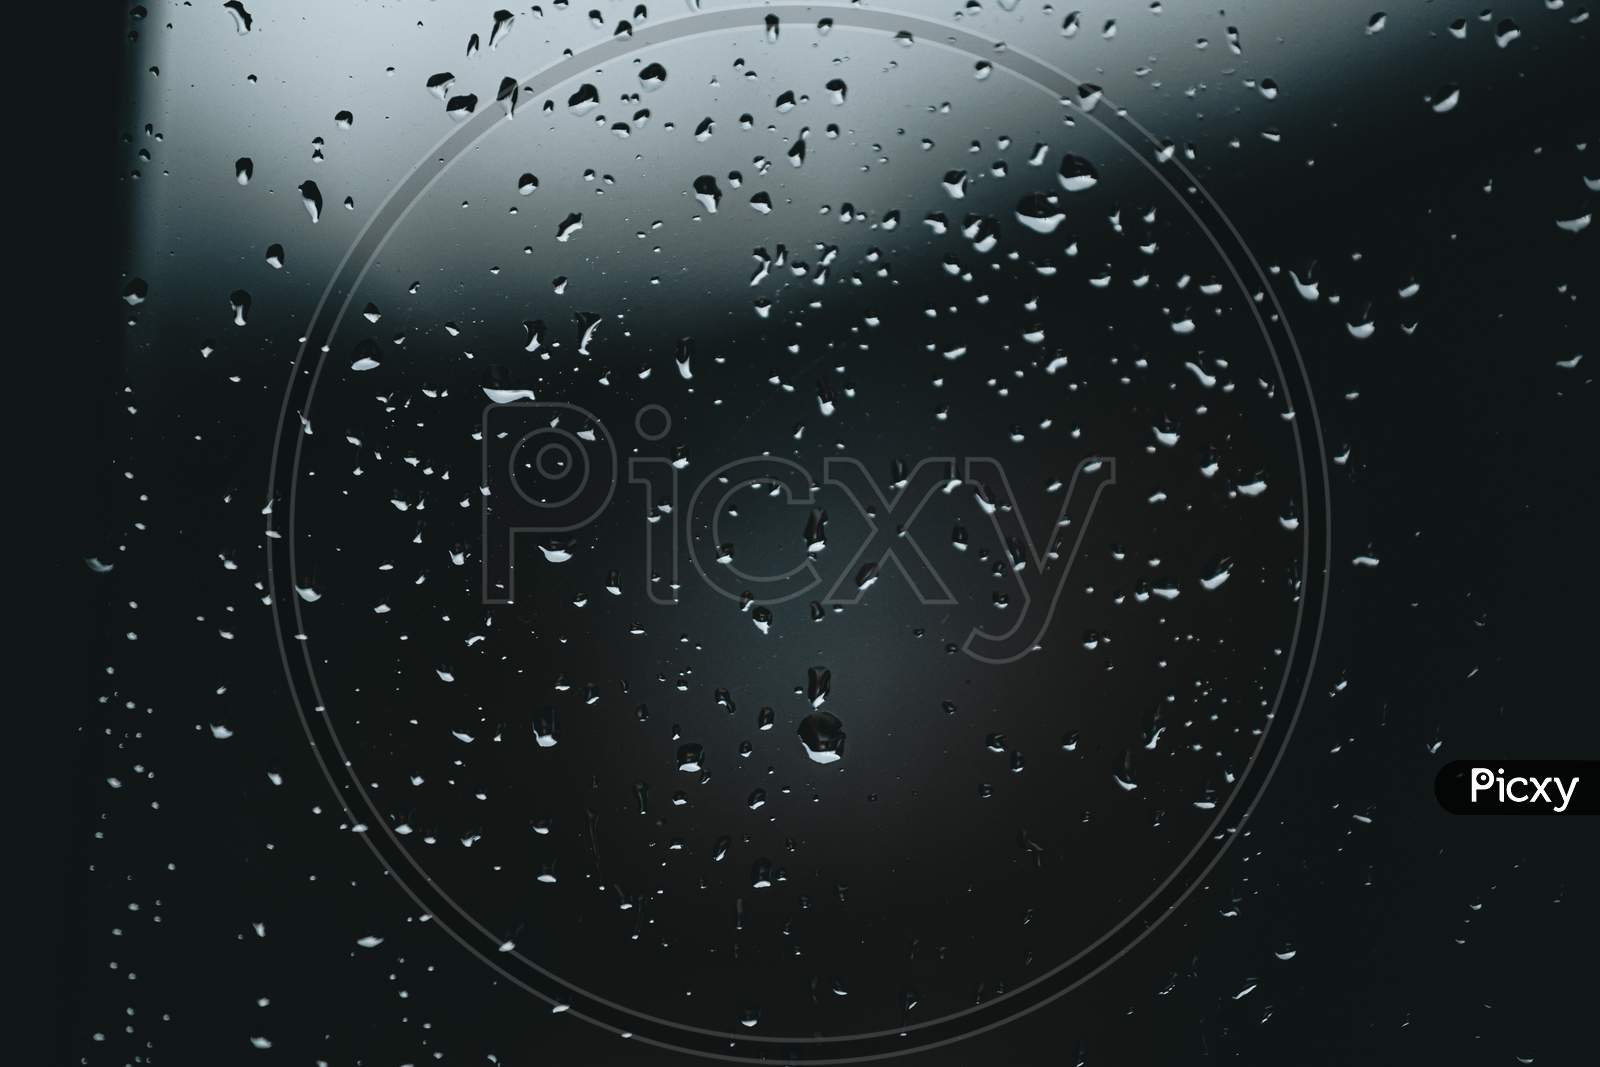 Horizontal Background Of Some Moody Rain Drops Over A Window With Dark Tones And Textured Droplets